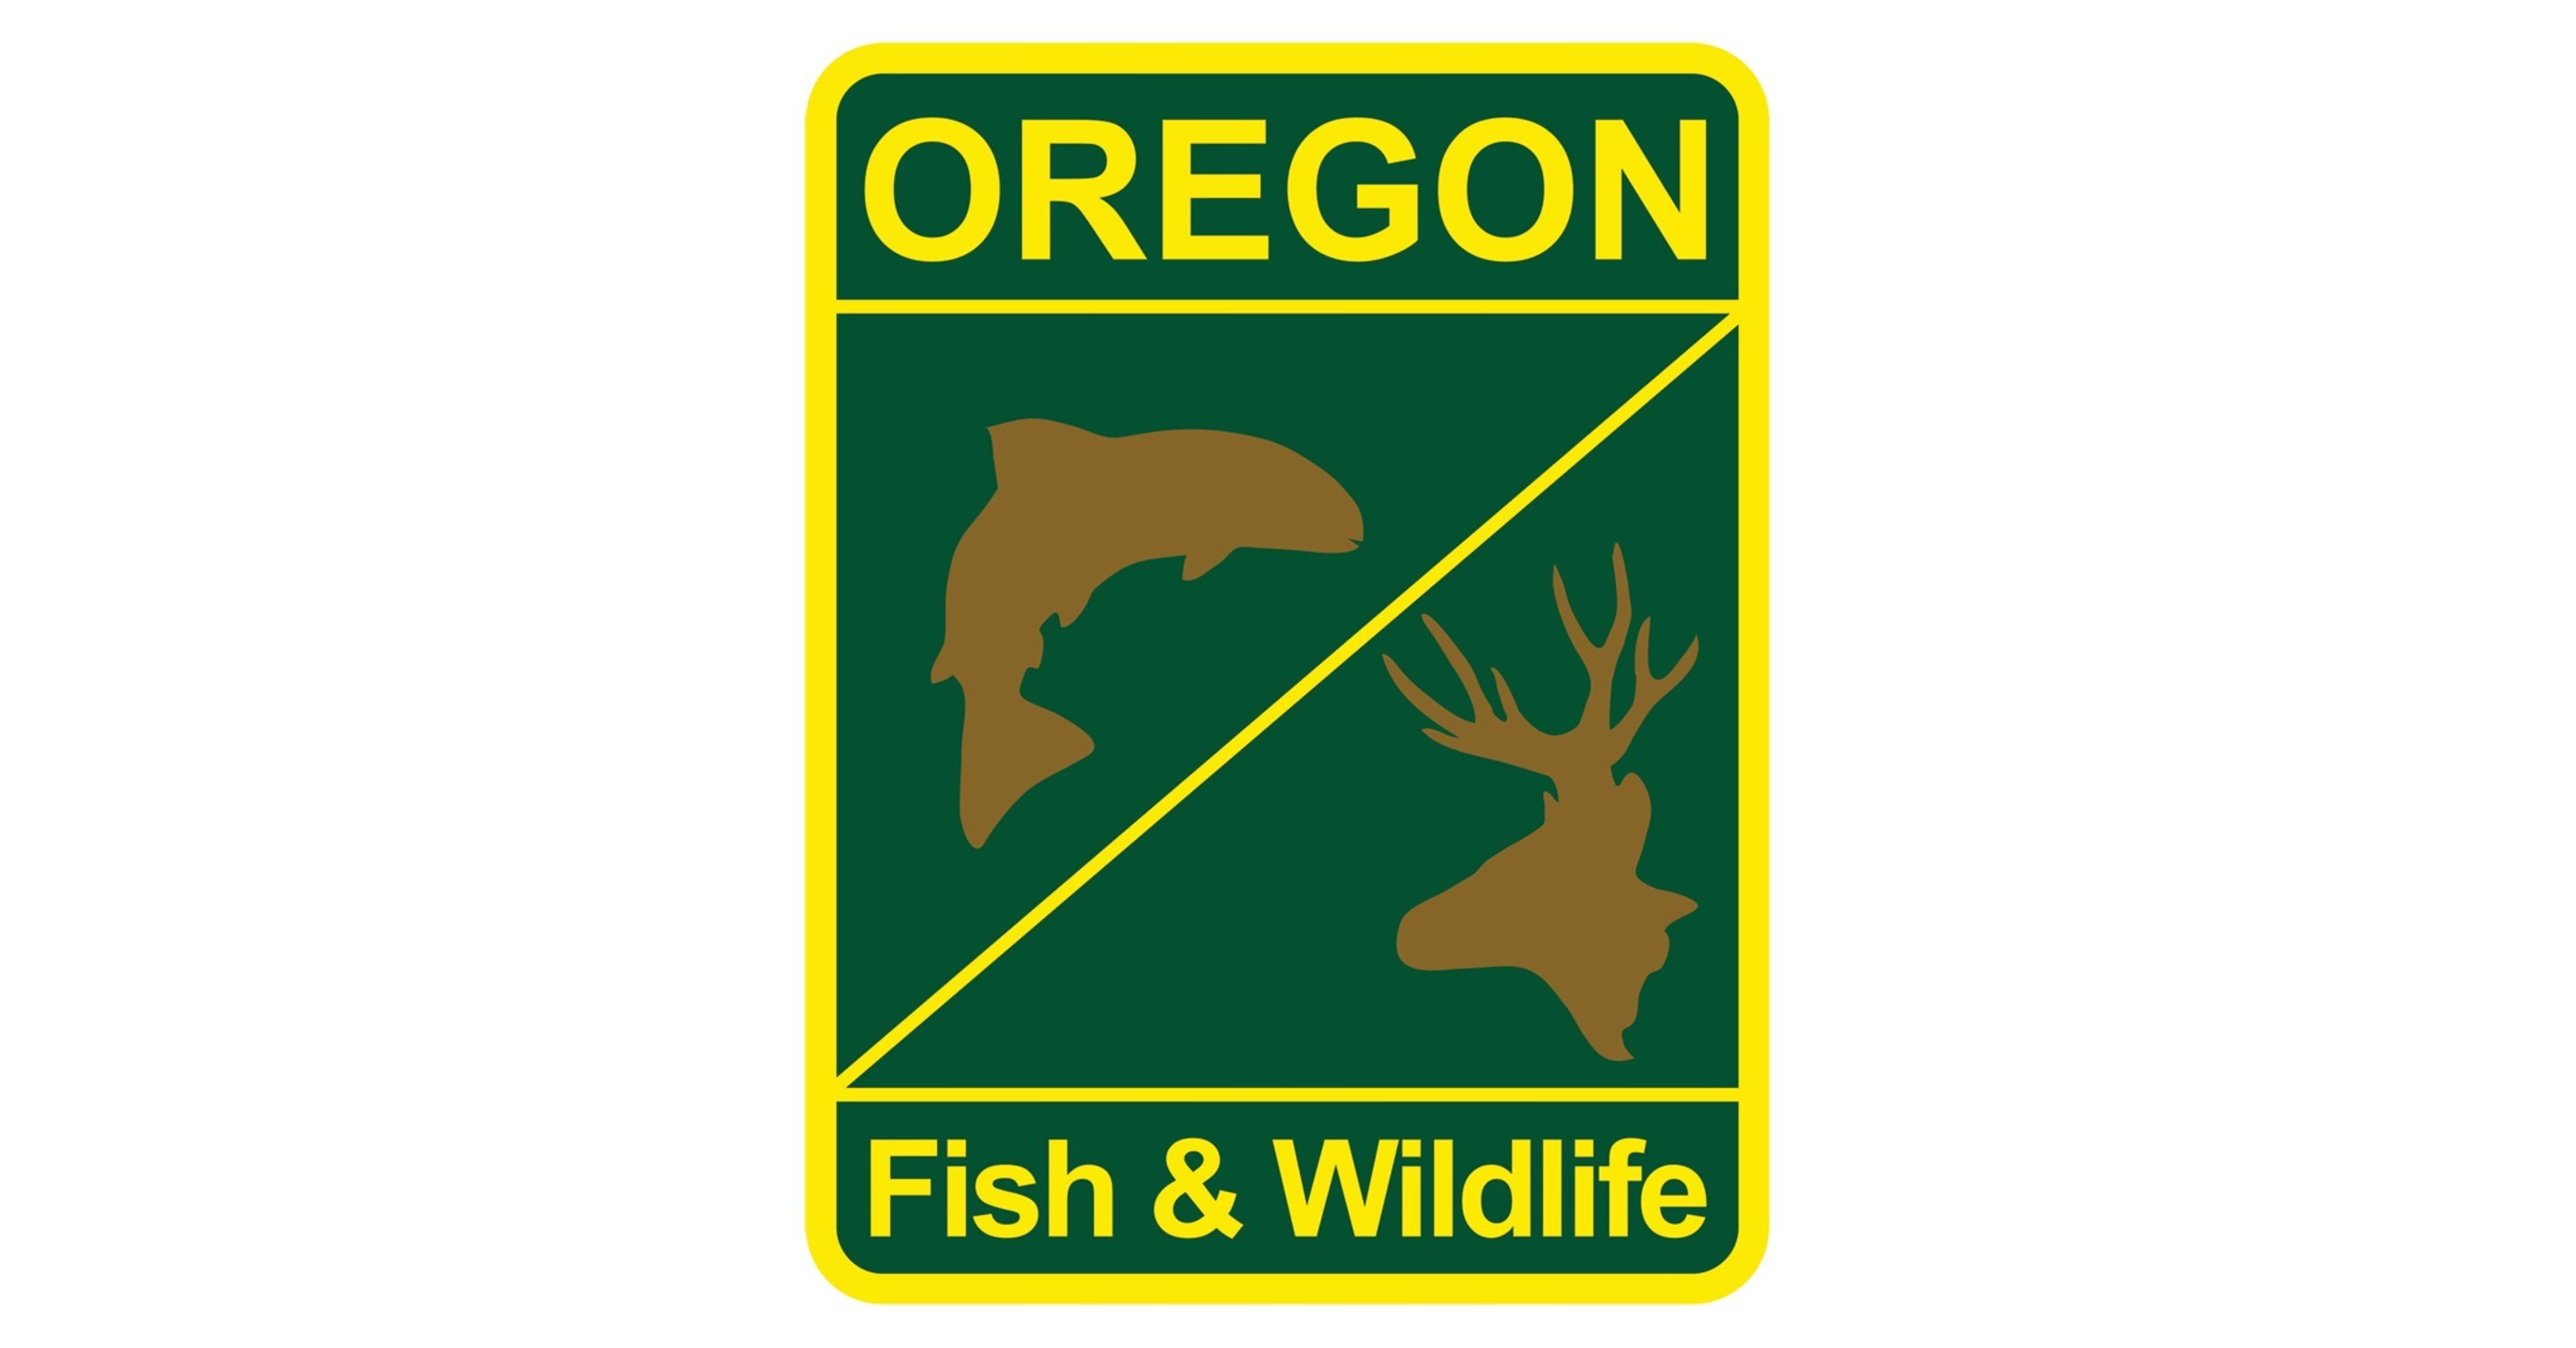 New study shows how outdoor recreation in Oregon is a growing and